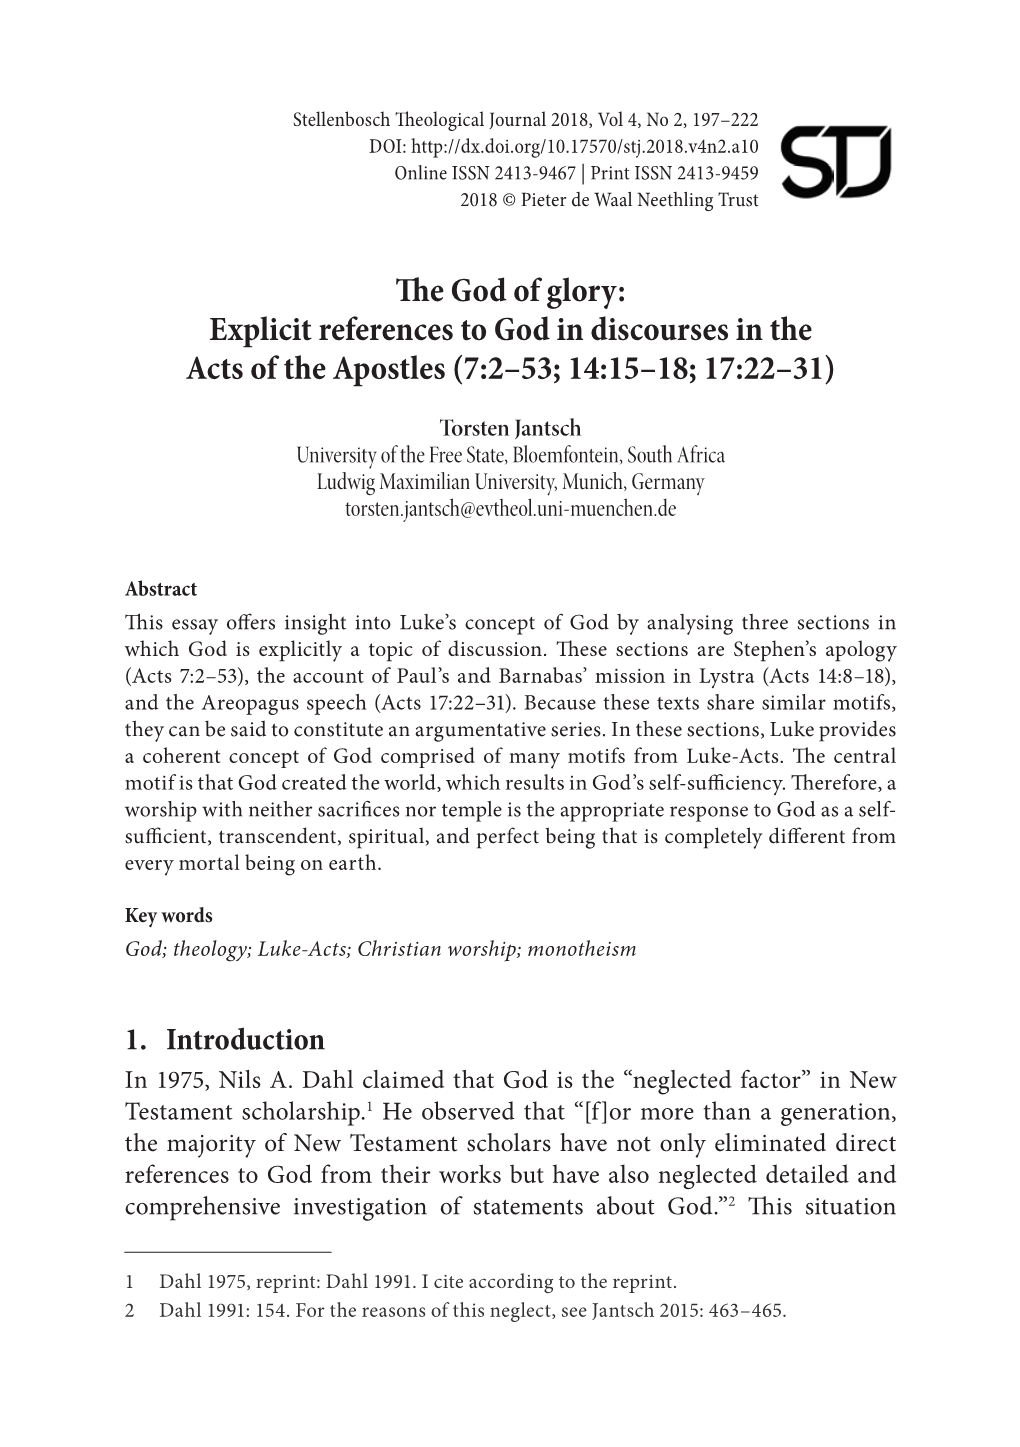 The God of Glory: Explicit References to God in Discourses in the Acts of the Apostles (7:2–53; 14:15–18; 17:22–31)